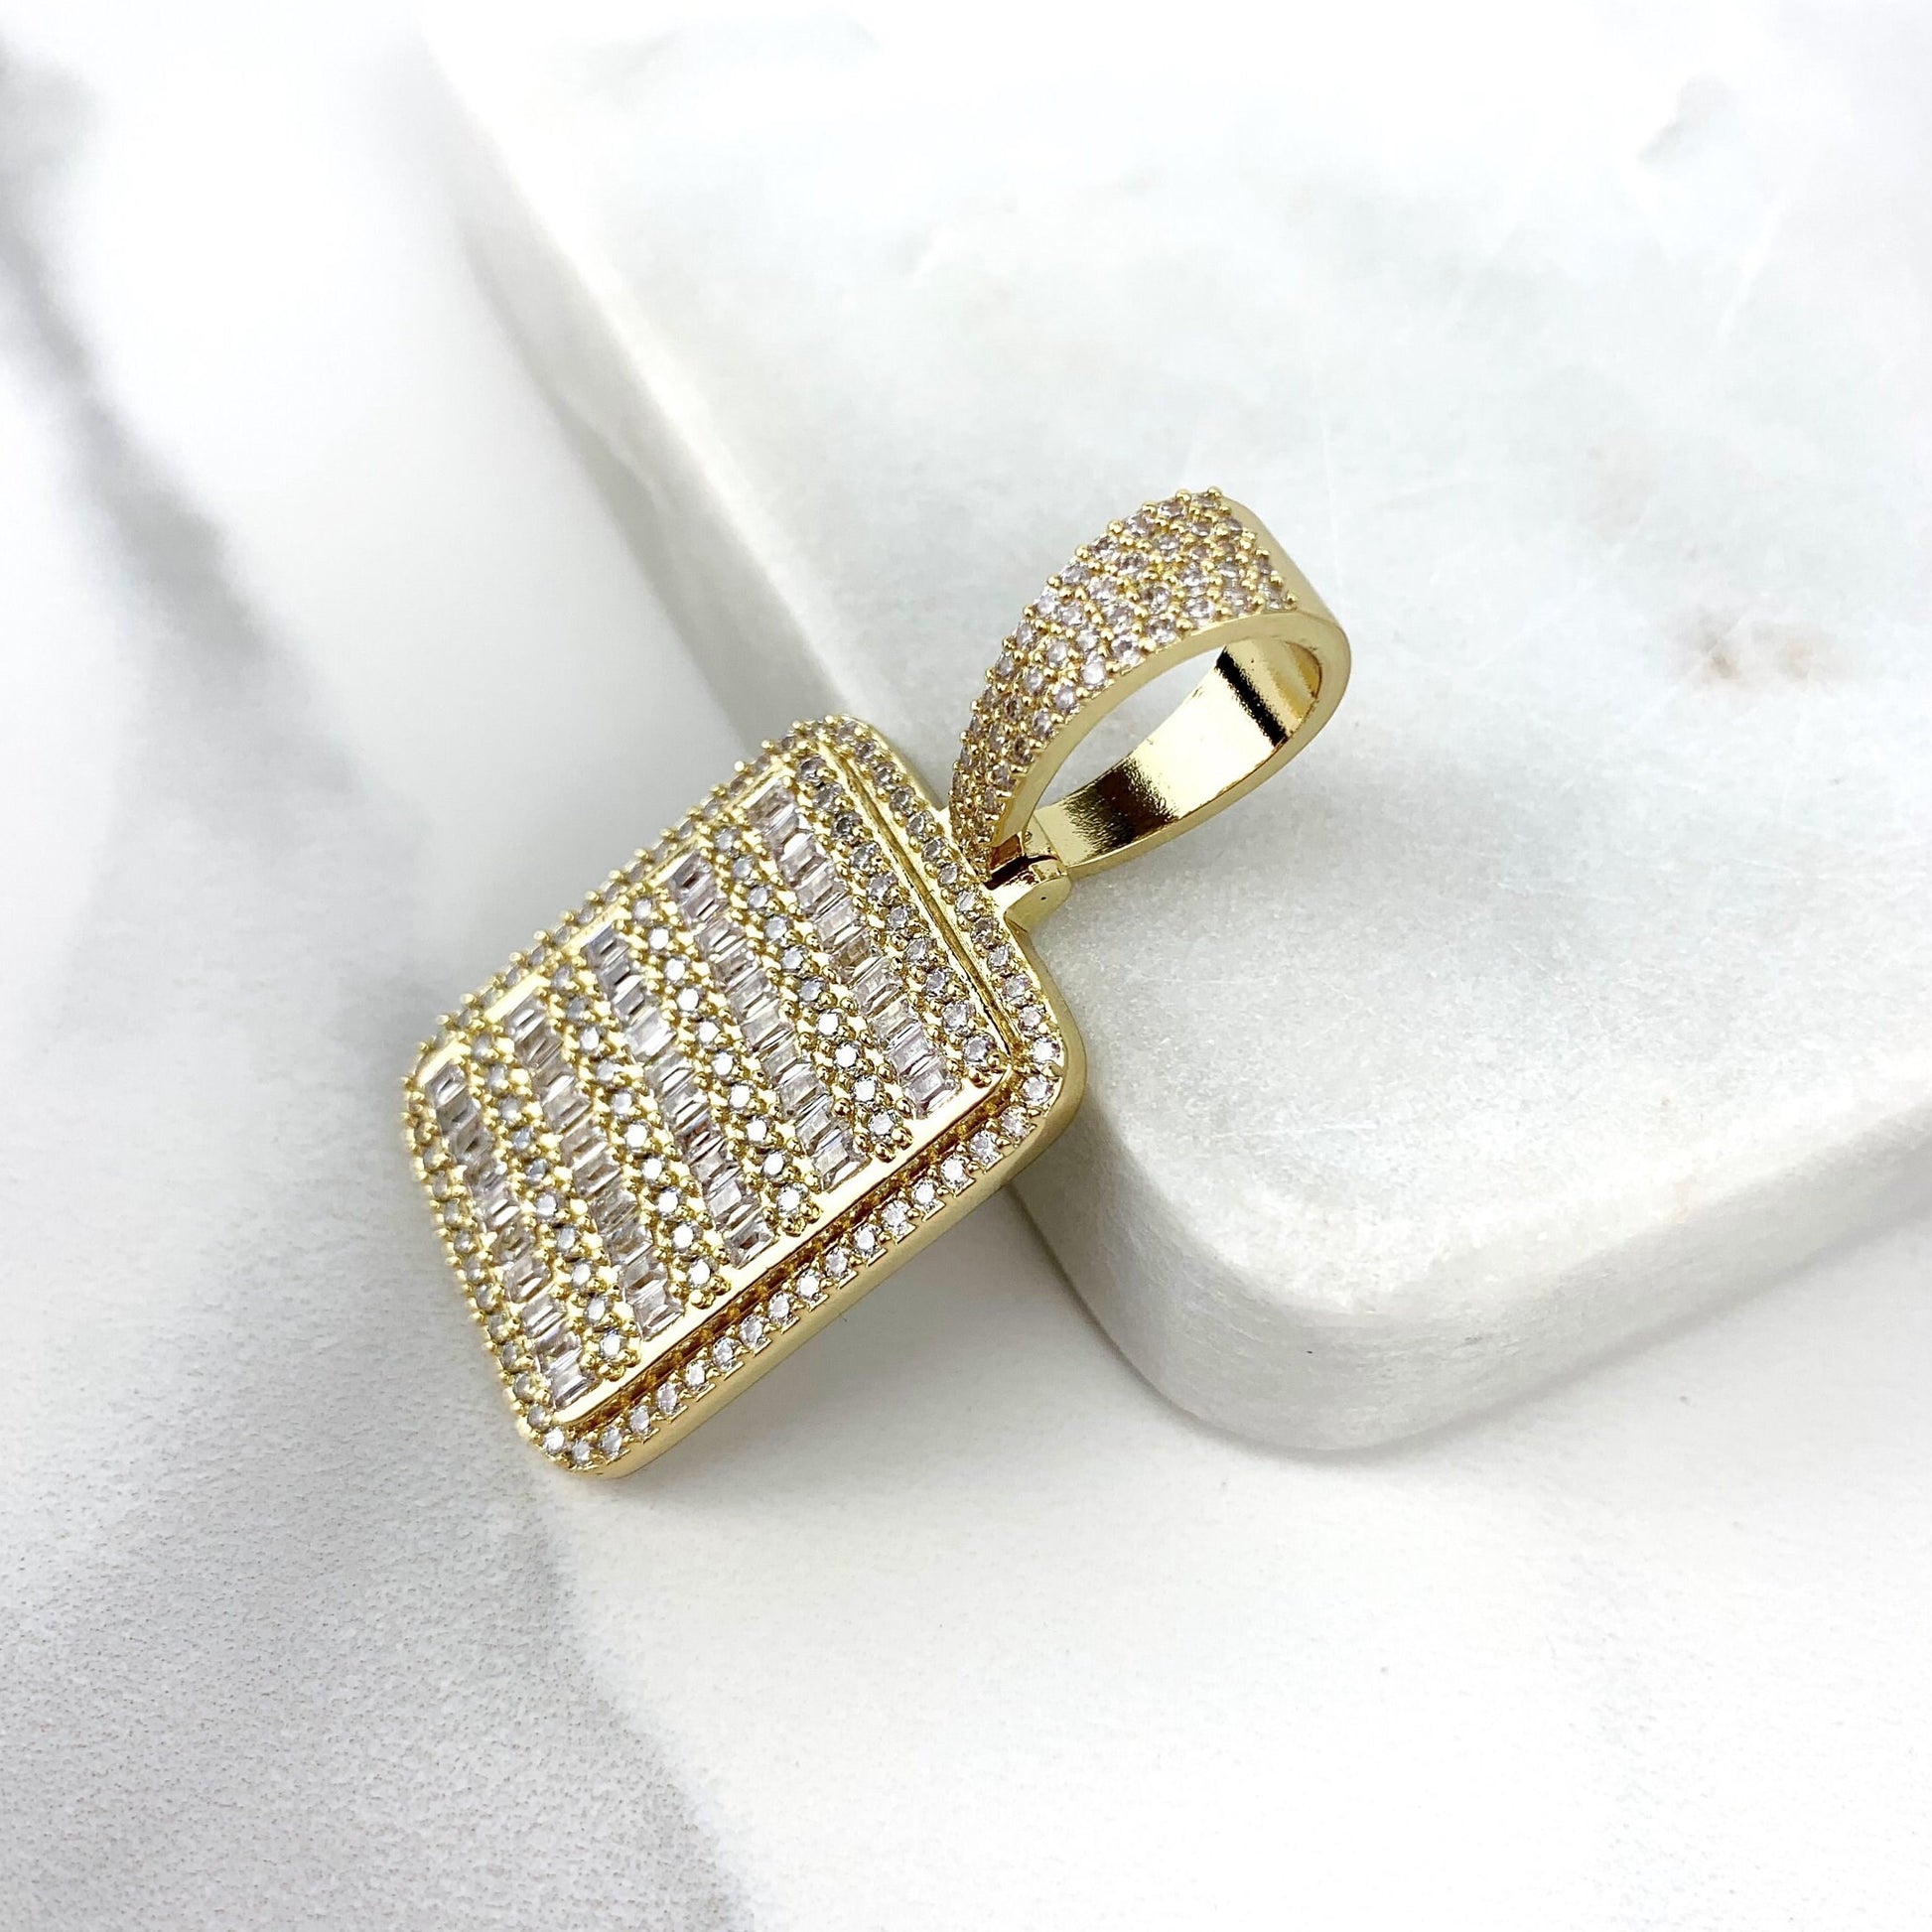 18k Gold Filled, Clear Micro Cubic Zirconia Square Iced Board Pendant Charms, Wholesale Jewelry Making Supplies